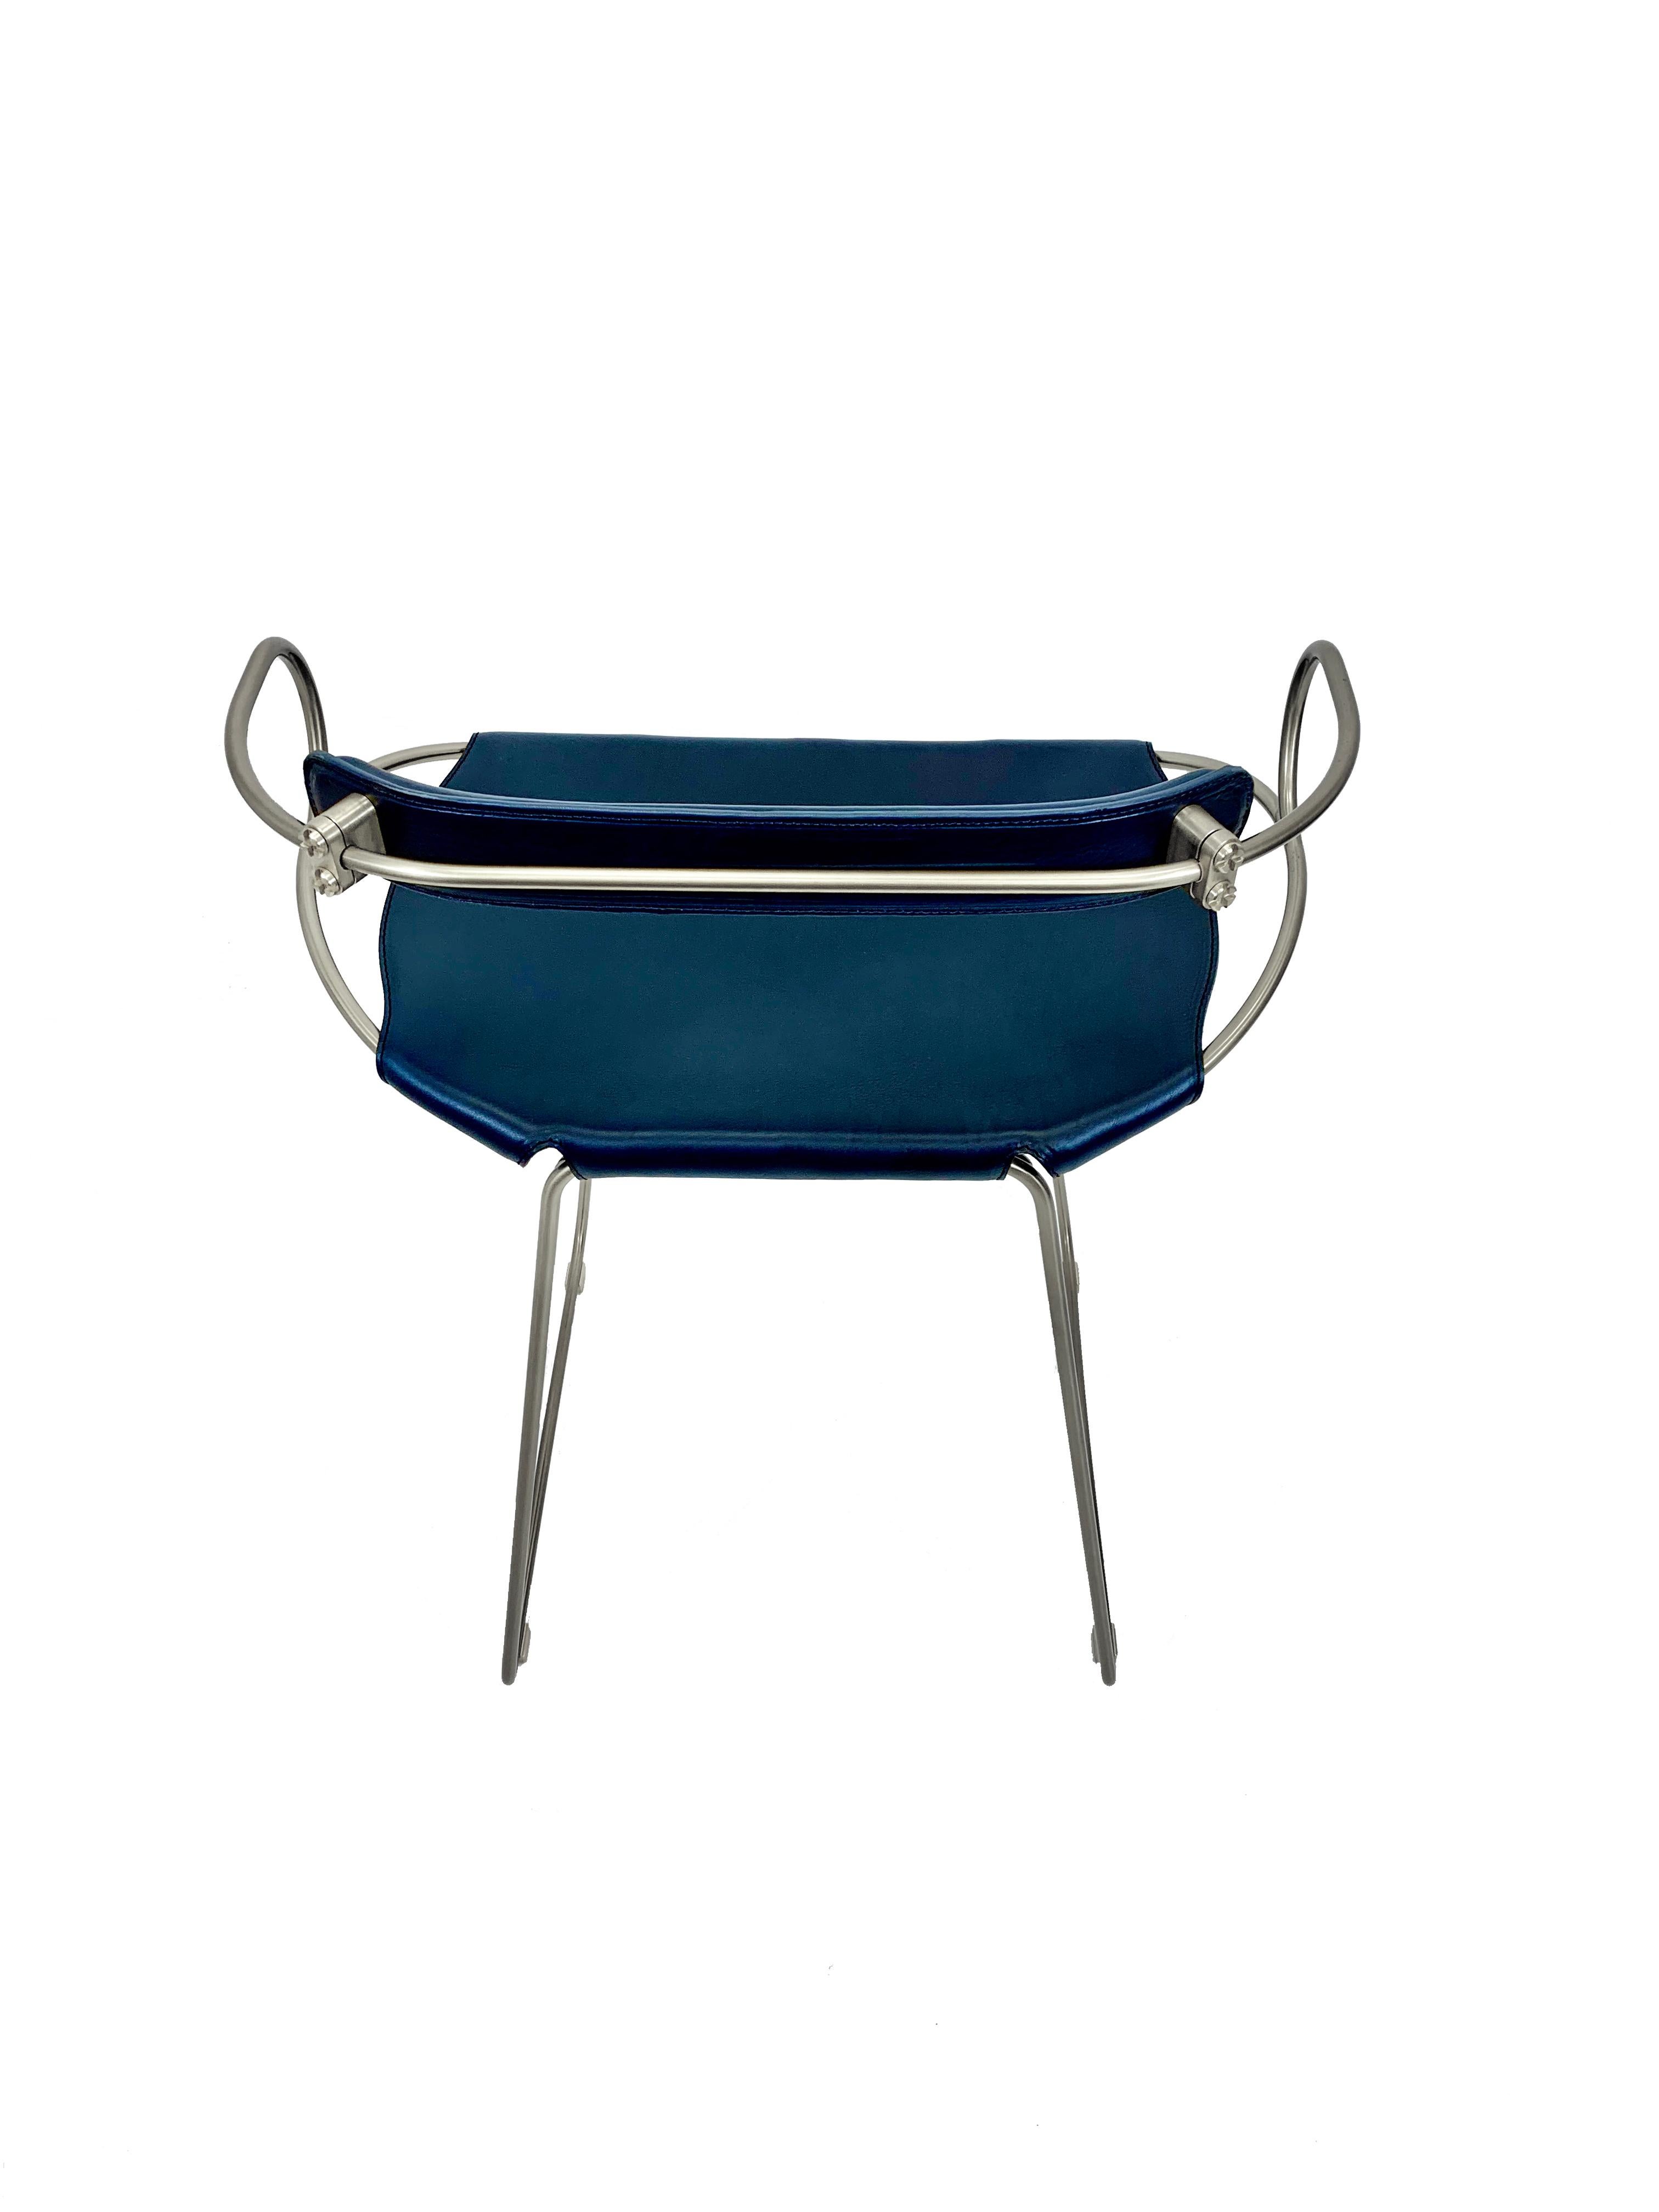 Spanish Contemporary Sculptural Bar Stool w. Backrest Old Silver Metal & Navy Leather For Sale